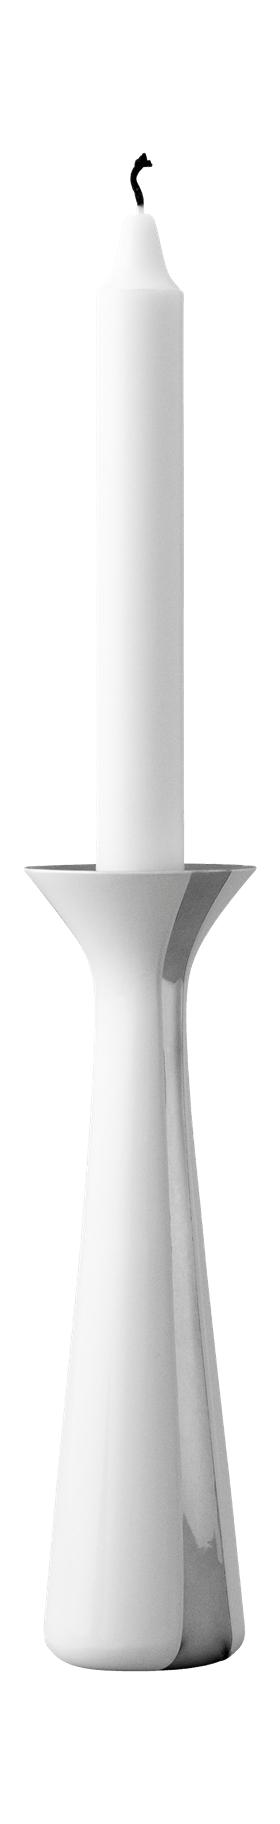 Stelton Unified Candlestick 21 Cm, White